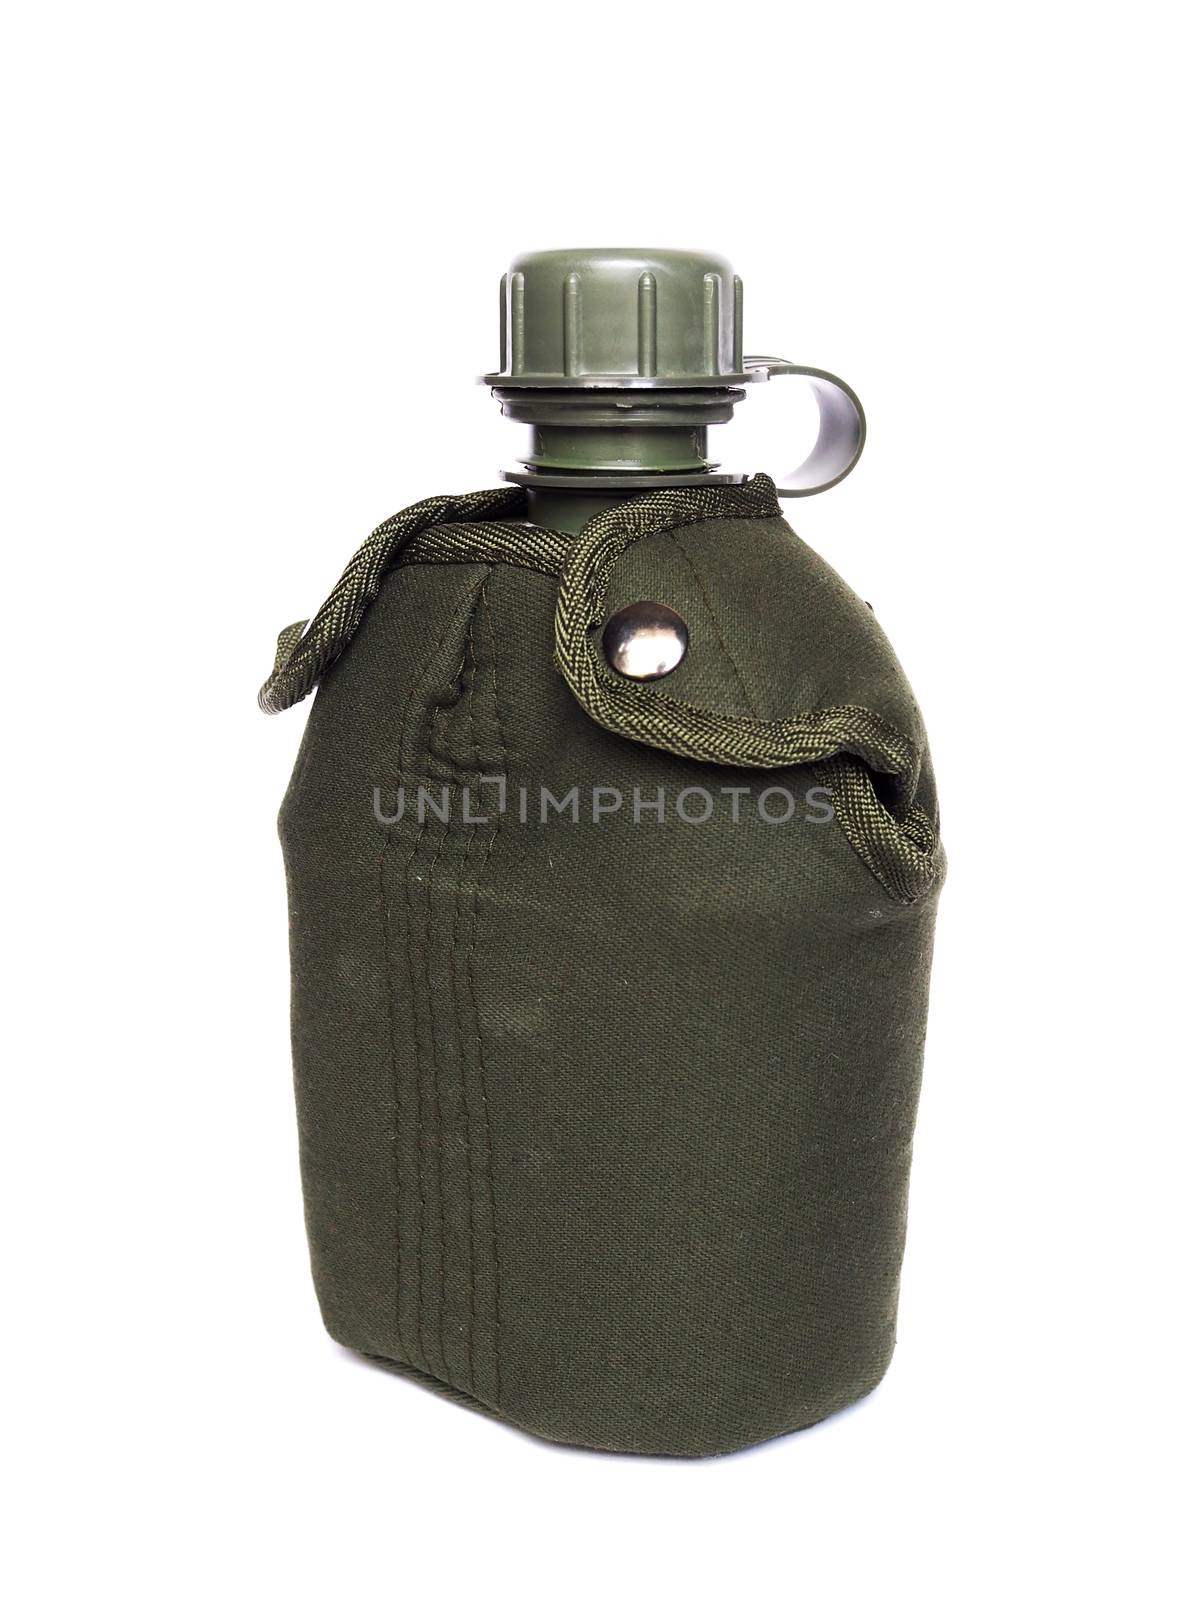 Green military water bottle for hiking, camping. by kittima05